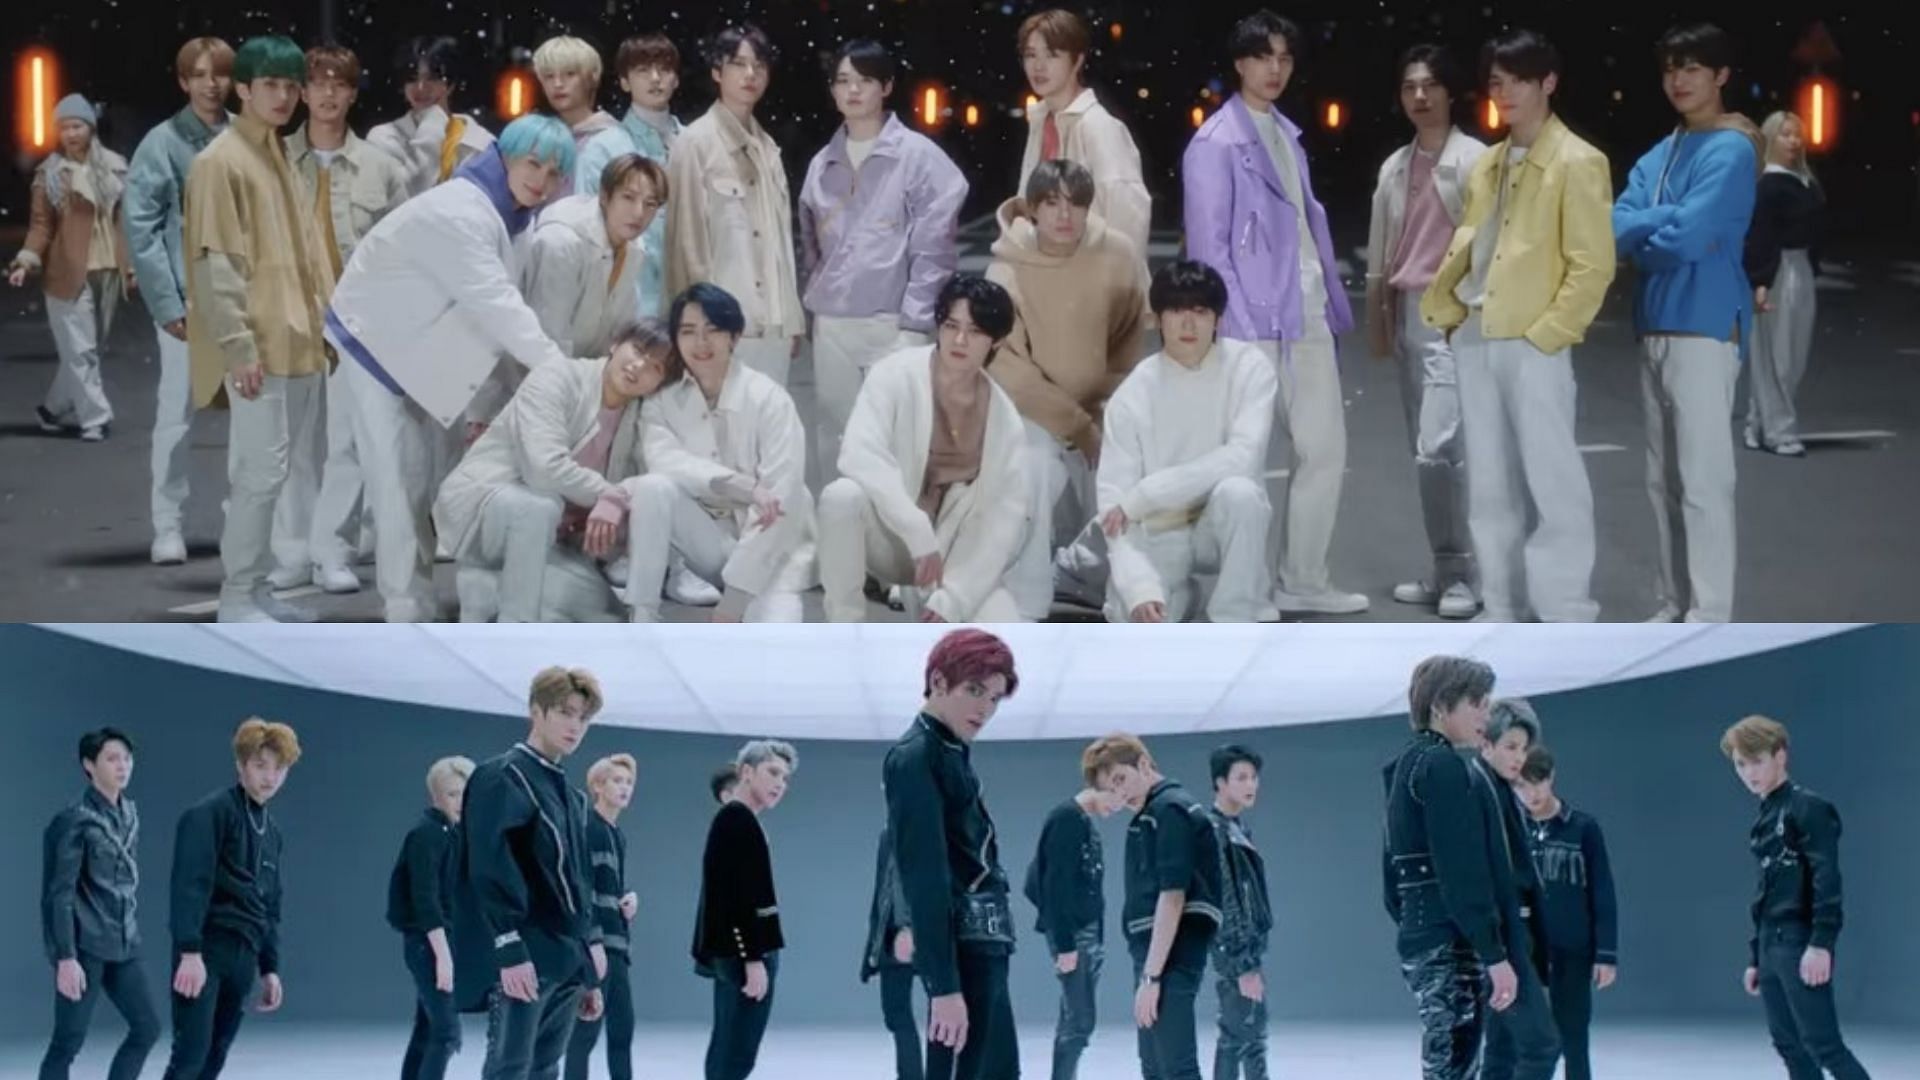 NCT 2023 releases their new song Golden Age (Images via Twitter/chayahyunx)